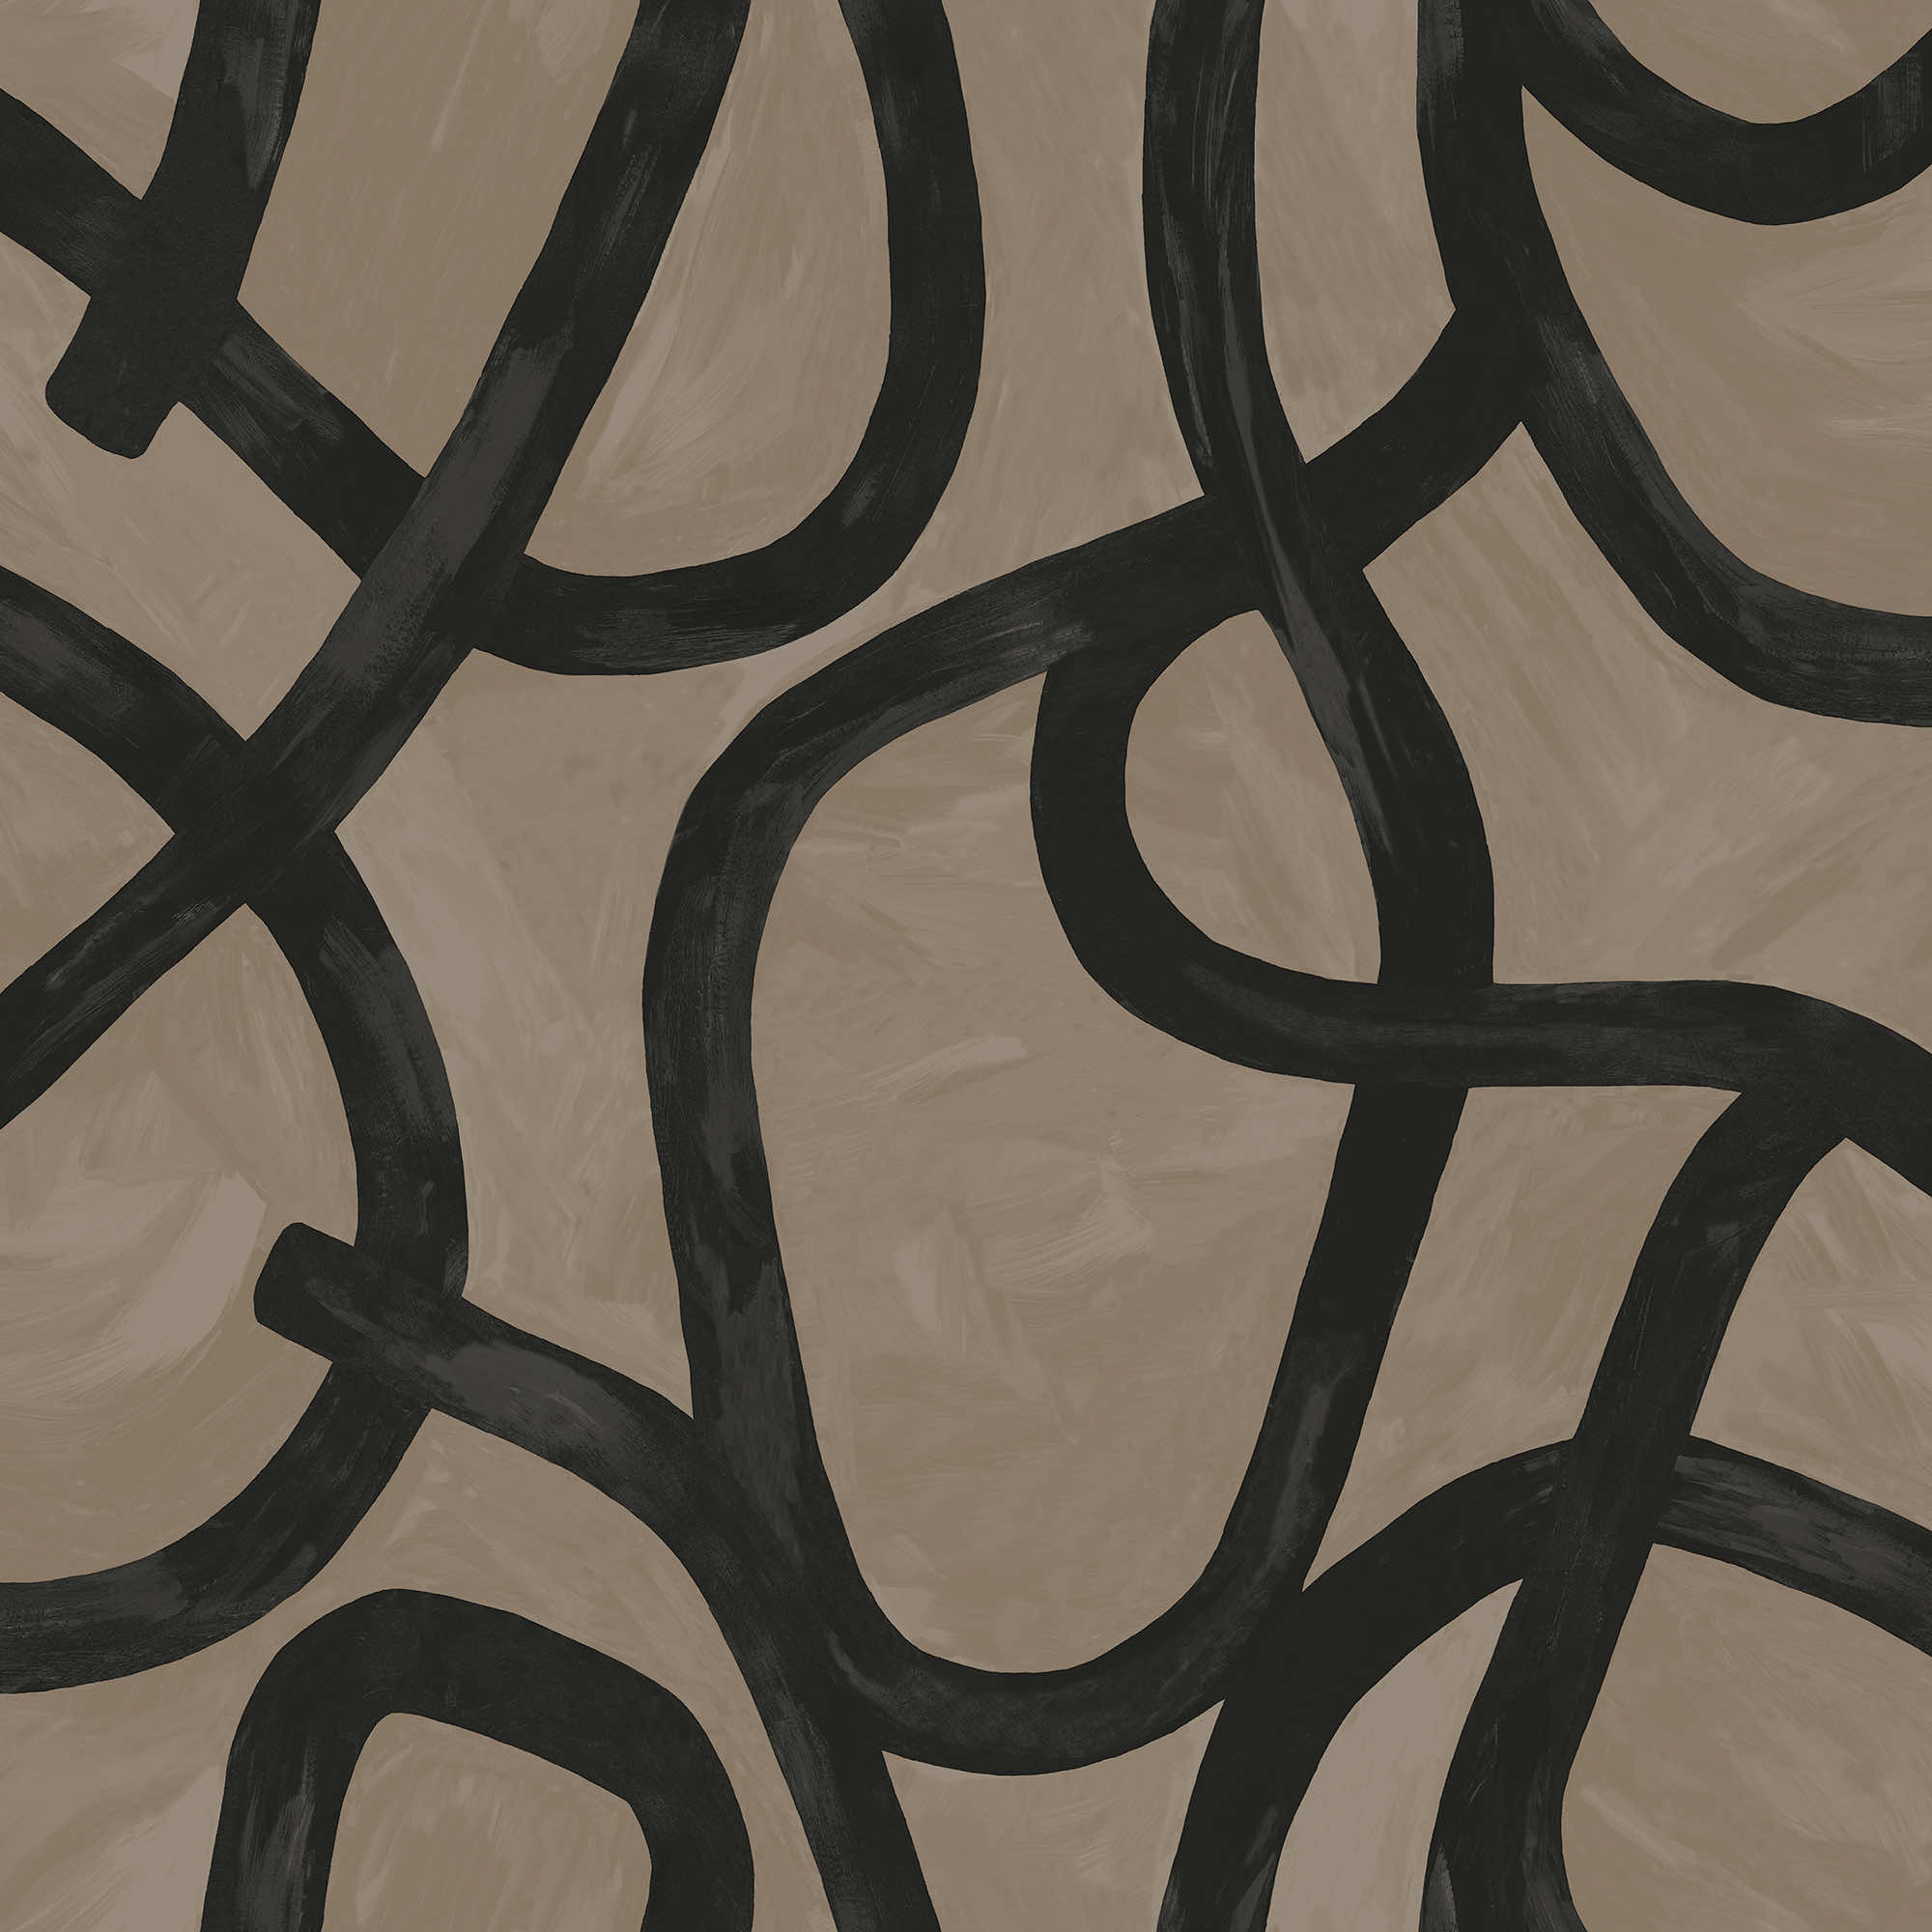 Image of Holden Decor Linear Swirl Taupe Wallpaper - 10.05m x 53cm